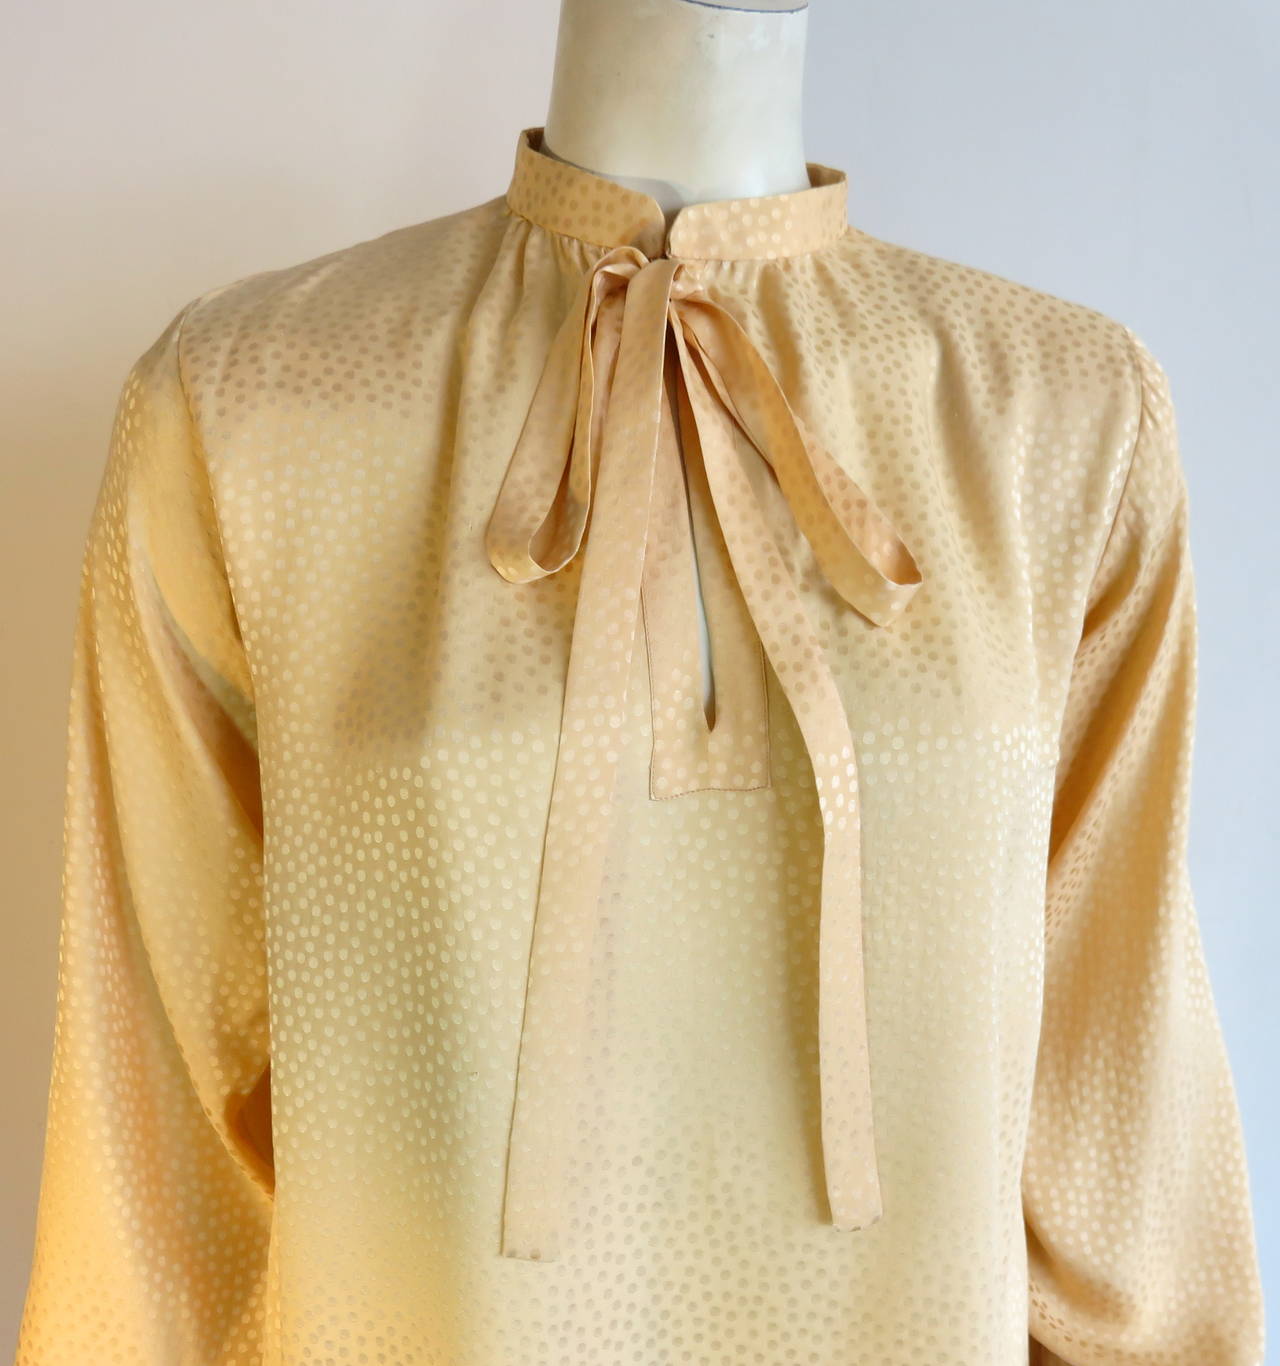 Excellent condition, 1970's YVES SAINT LAURENT 100% silk blouse with dotted jacquard patterning.

Tie front neck detail with split neck opening at center-front.

Made in France.

In excellent condition with no signs of wear or